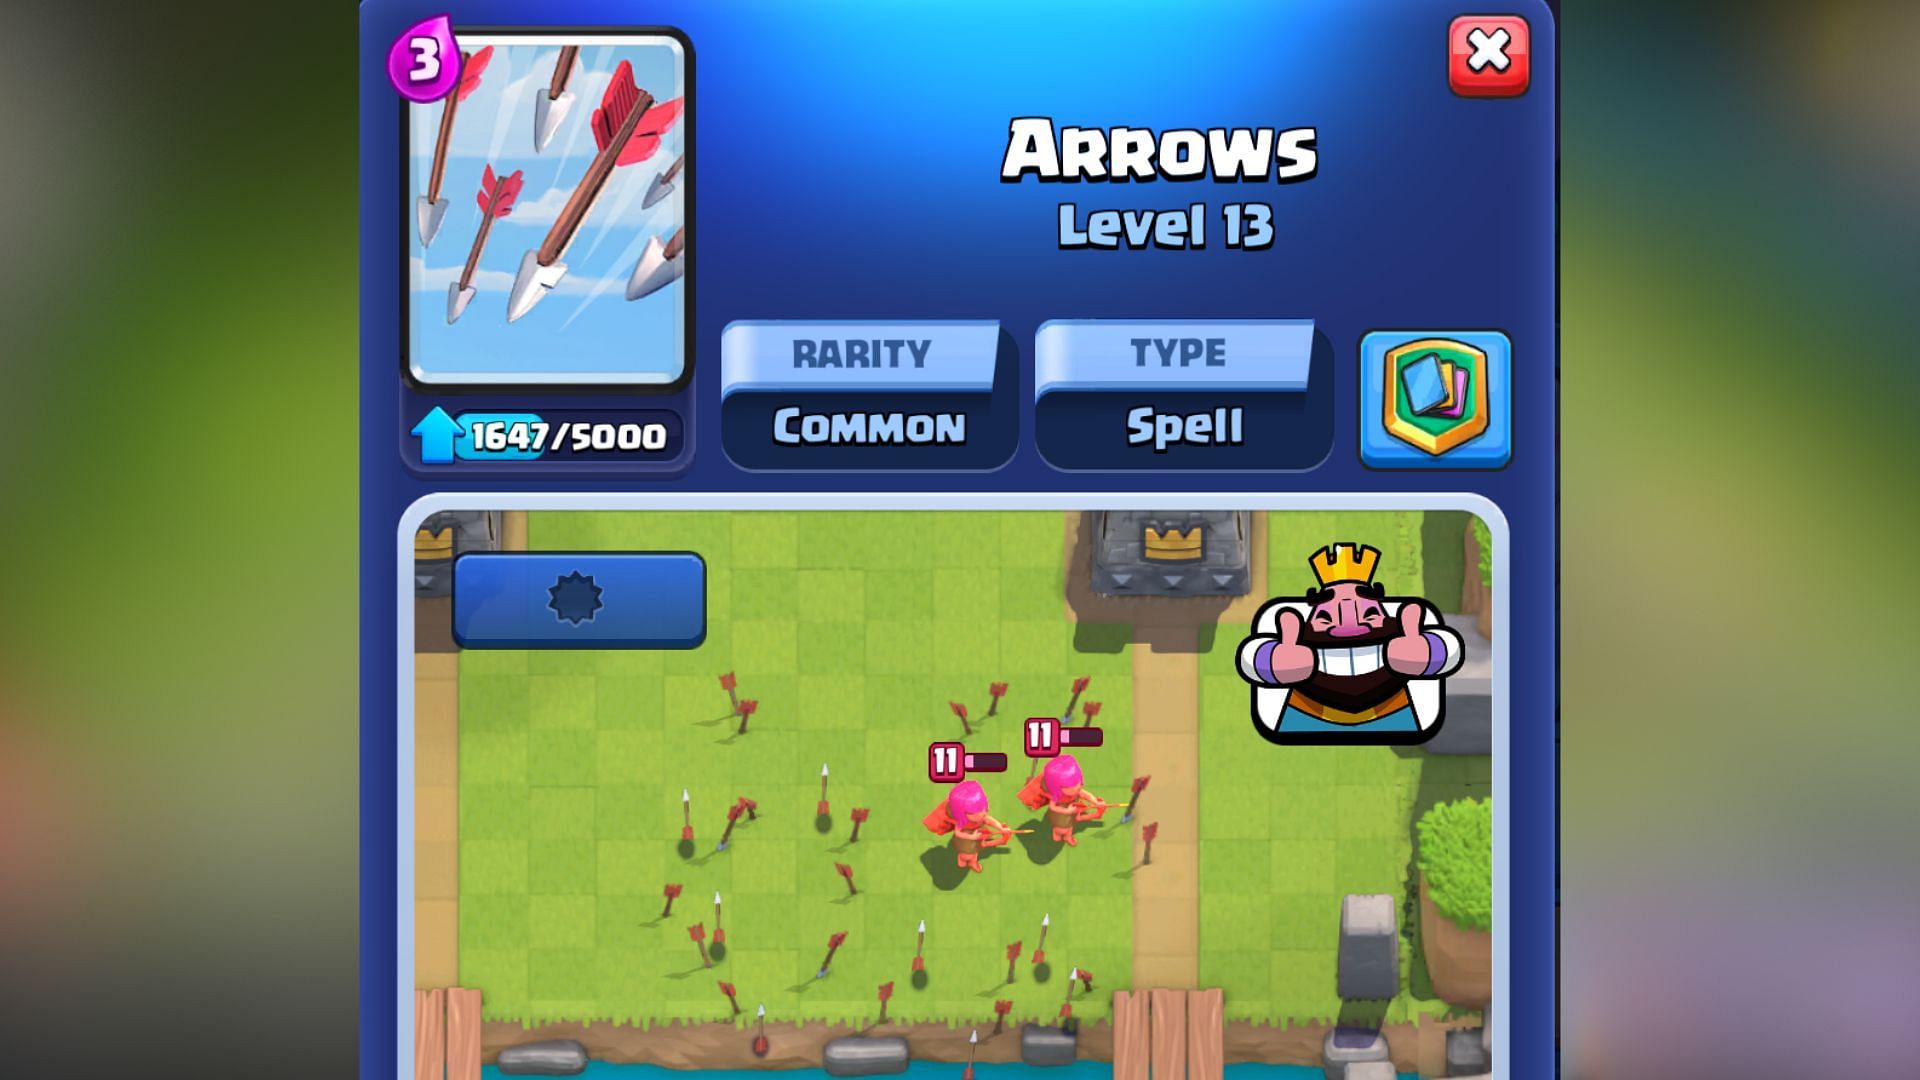 Arrows in Clash Royale (Image via SuperCell)